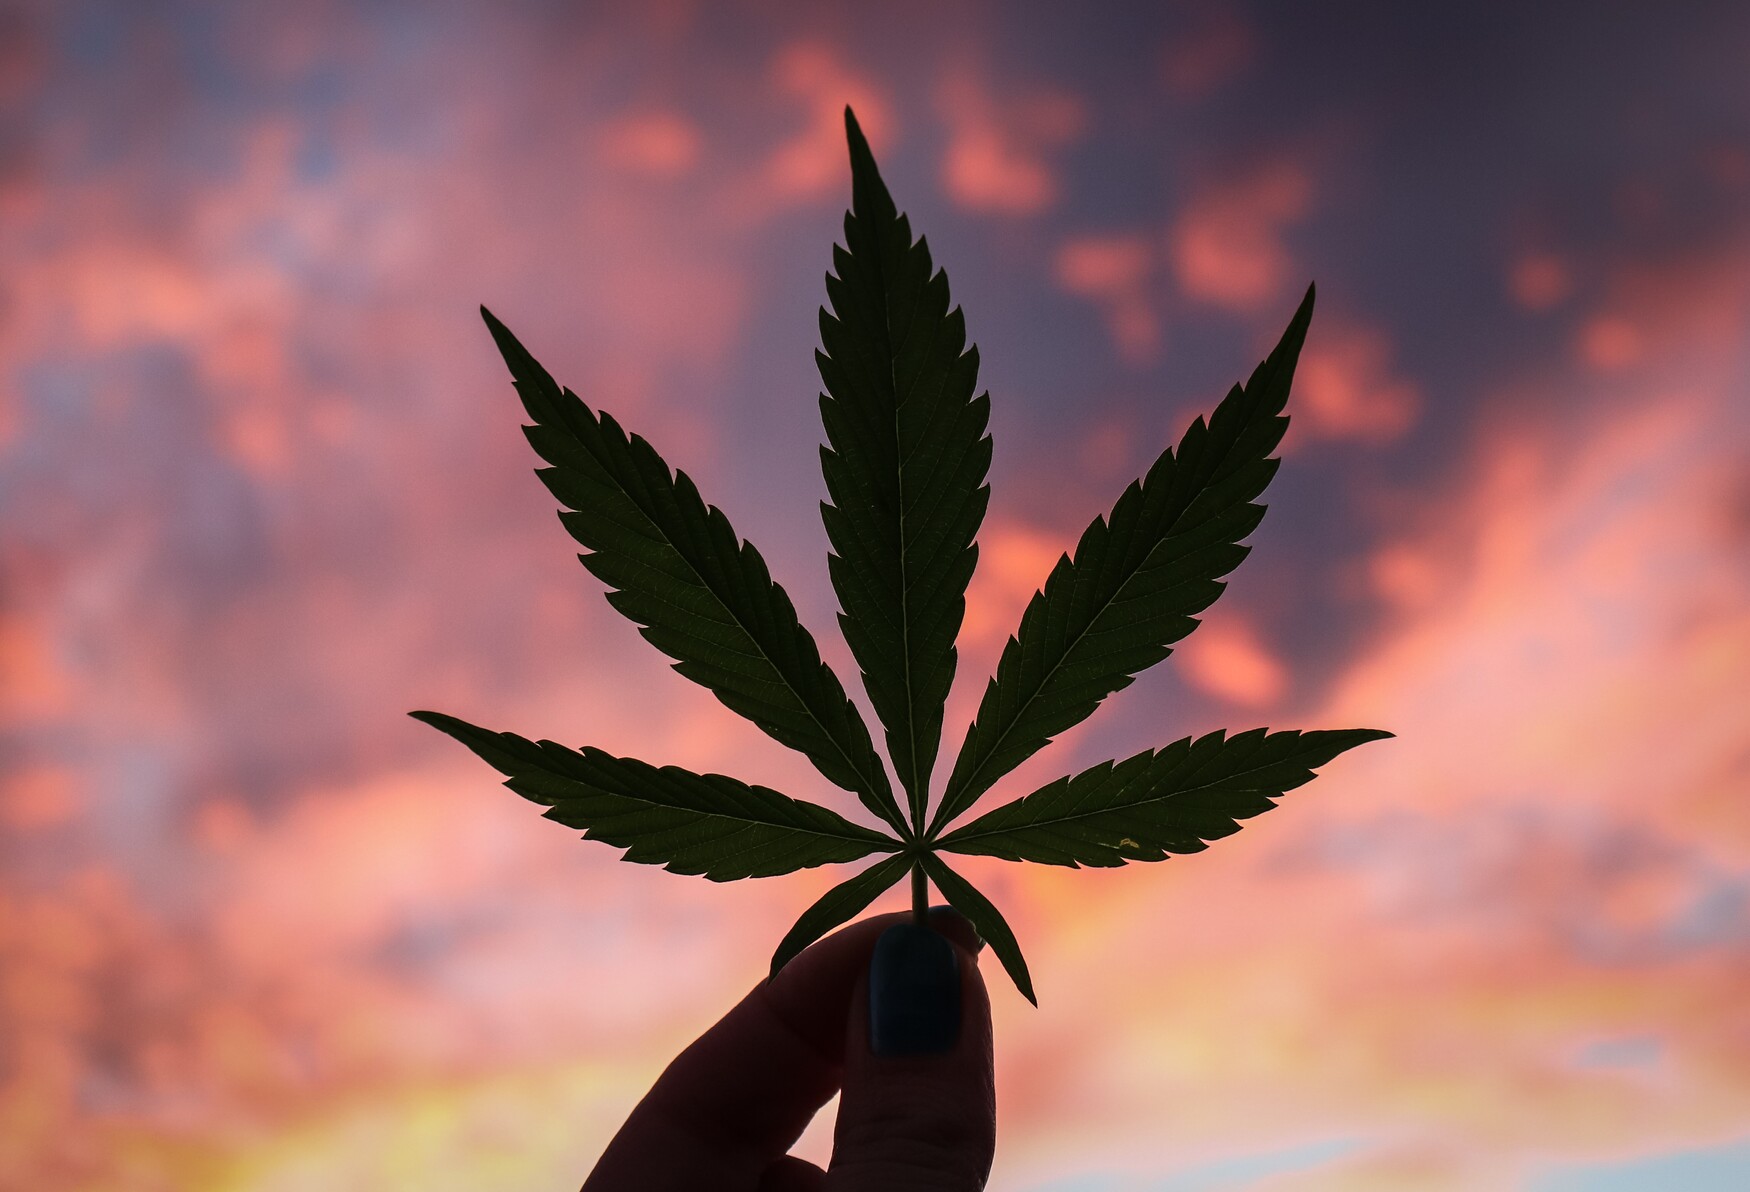 A cannabis leaf is held in the air at dusk.